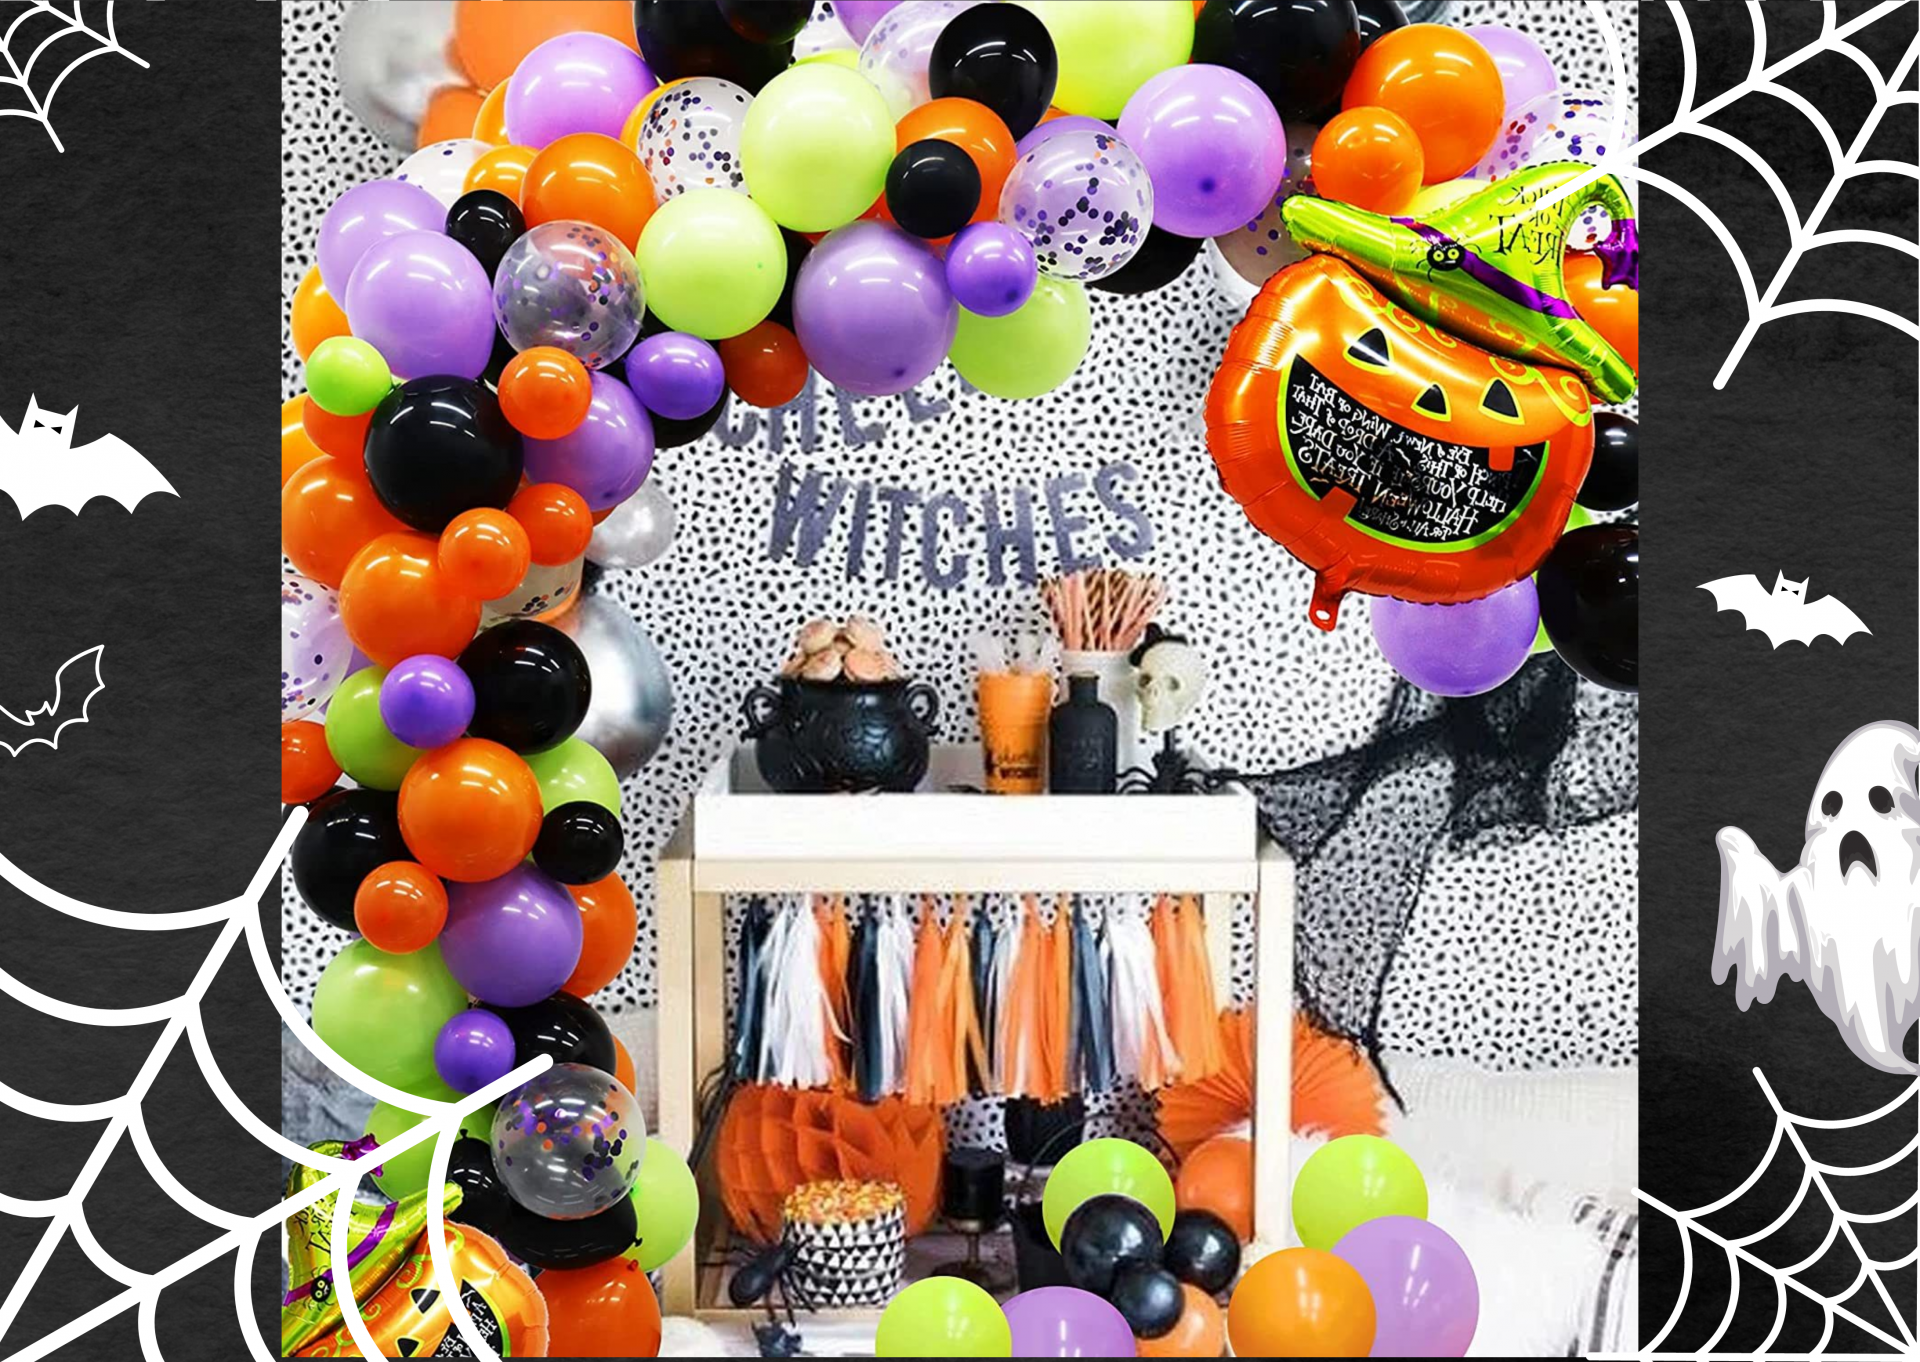 Set up a photo booth with props and backdrops made from balloons.